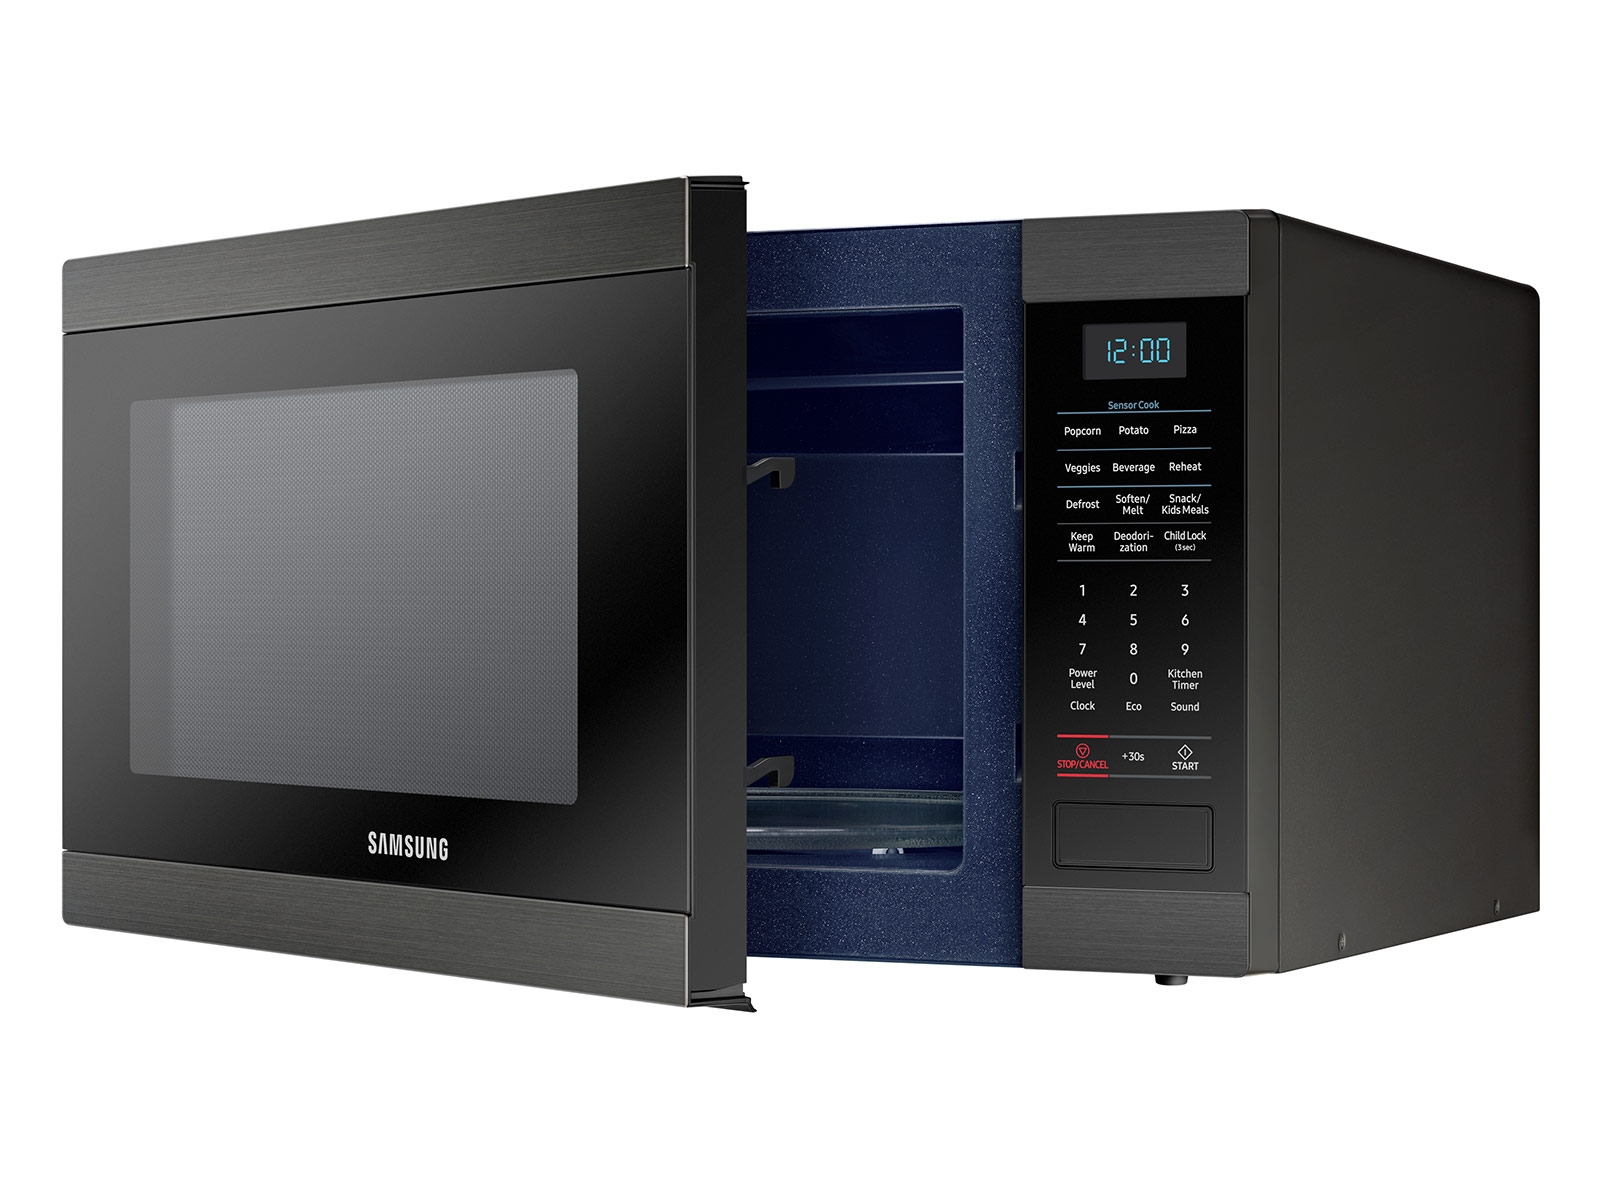 Samsung Over The Range Microwave - 1.9 Cu. ft. Black Stainless Steel